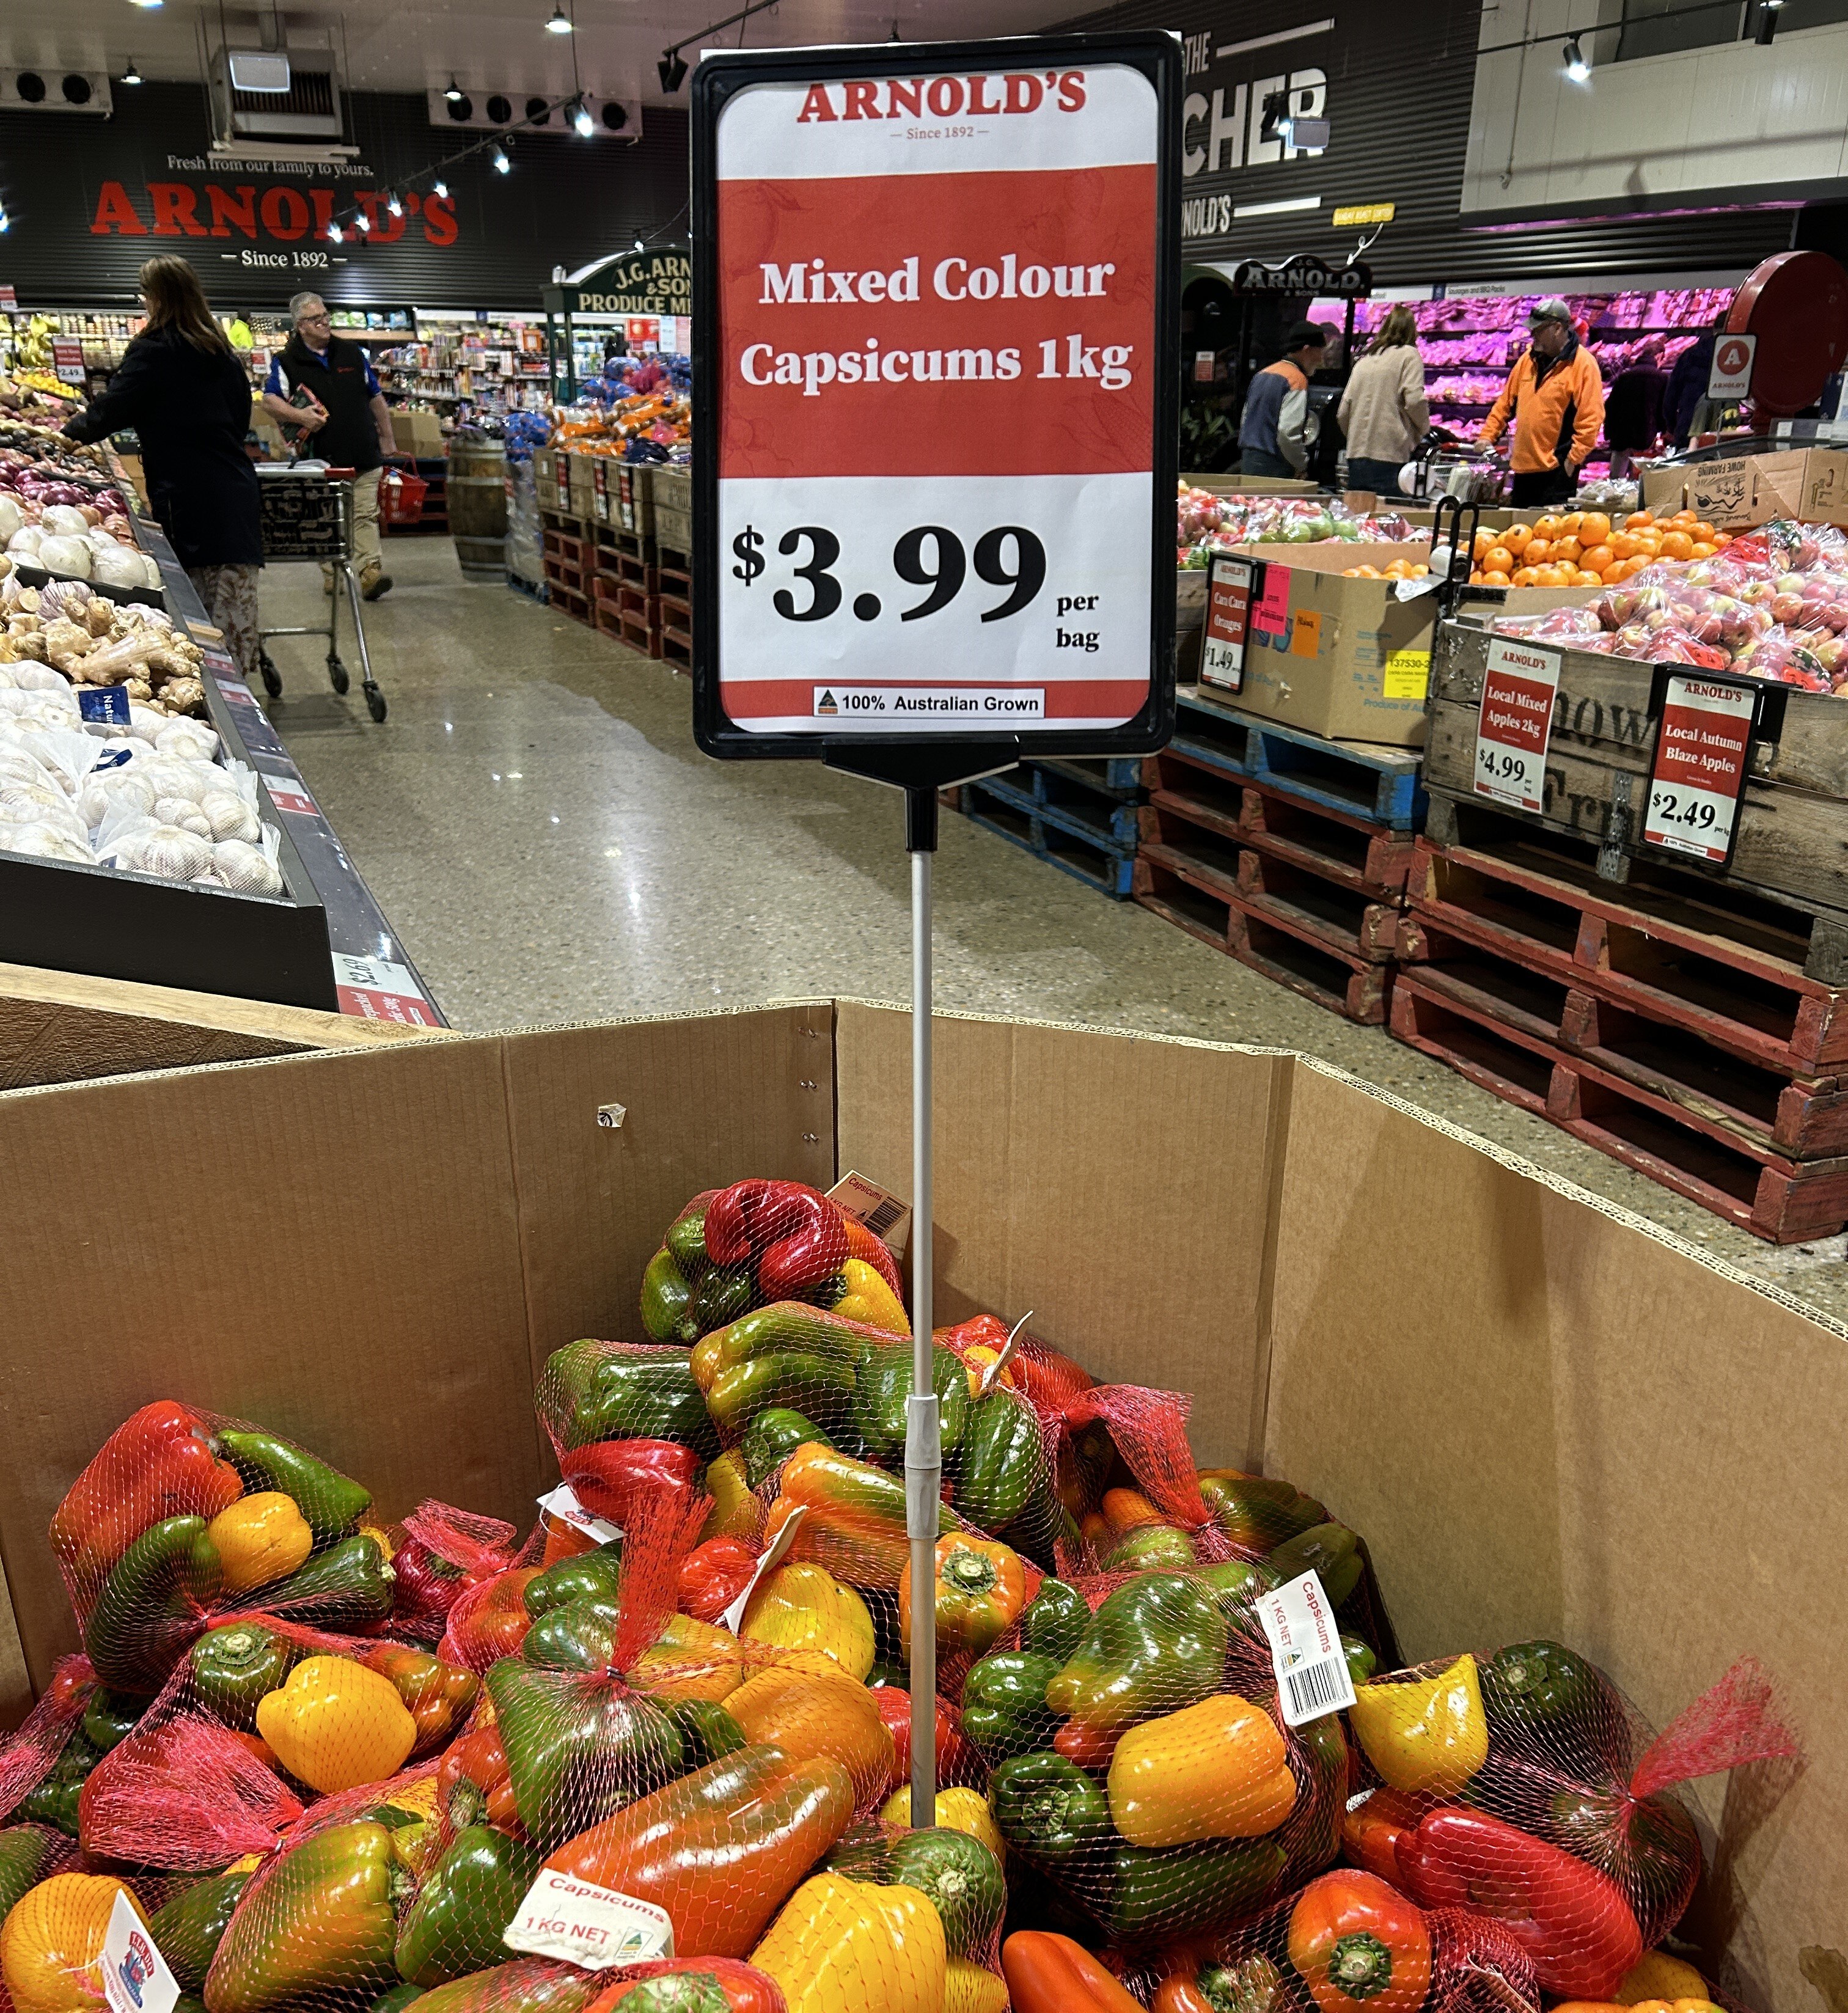 A large box of capsicums on sale at a grocer in Wodonga.